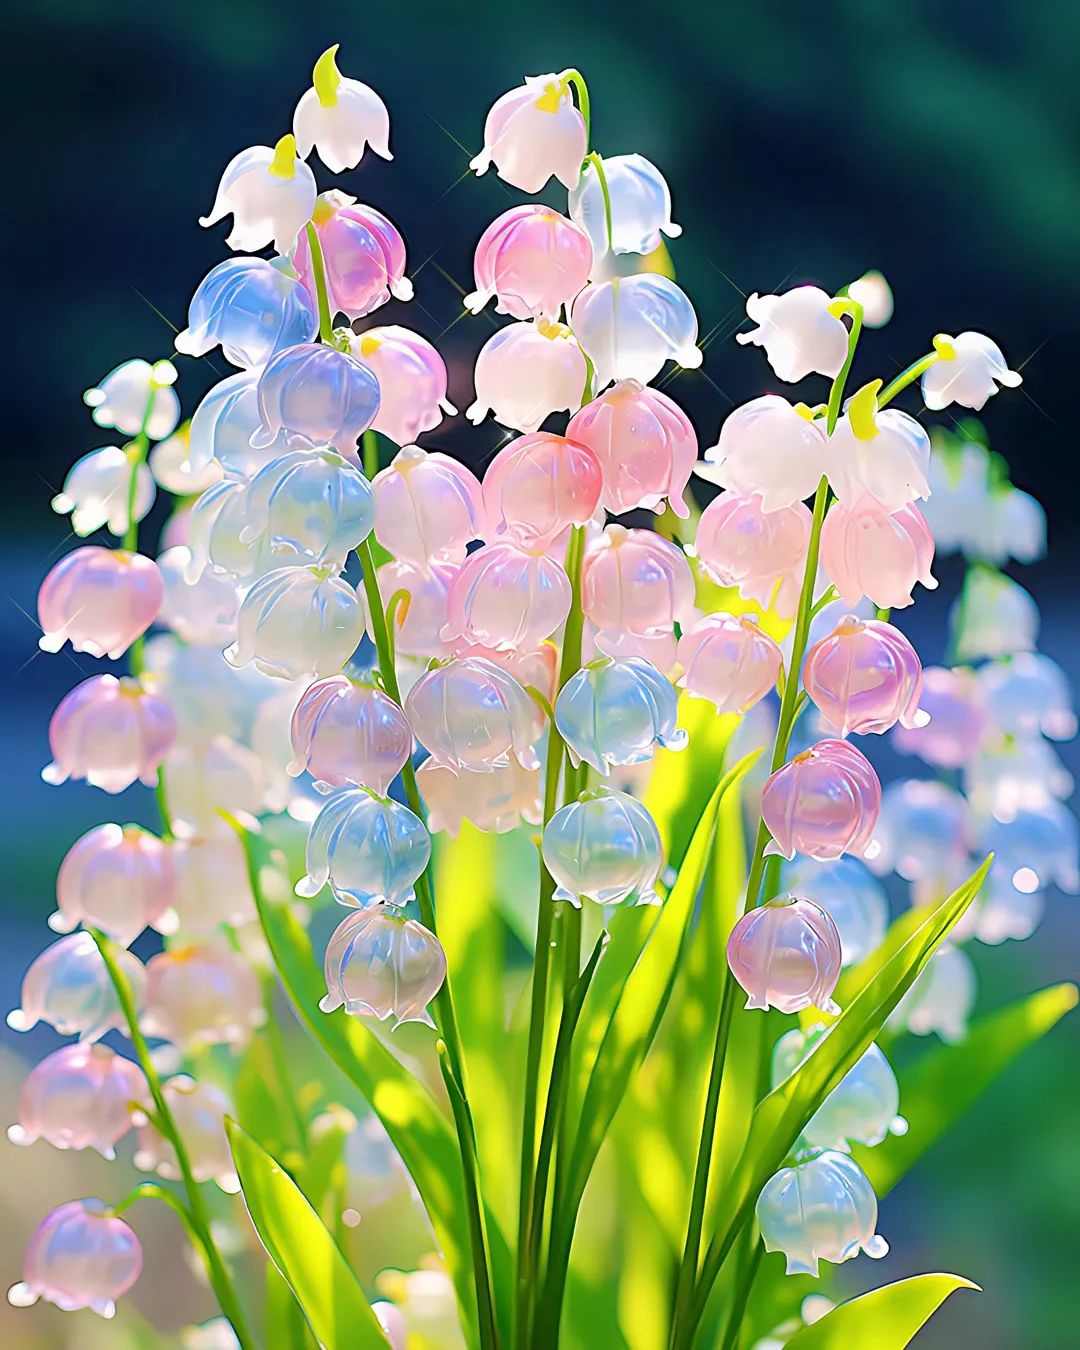 Lily of the Valley - Flowers - Featured Content - Lovingly